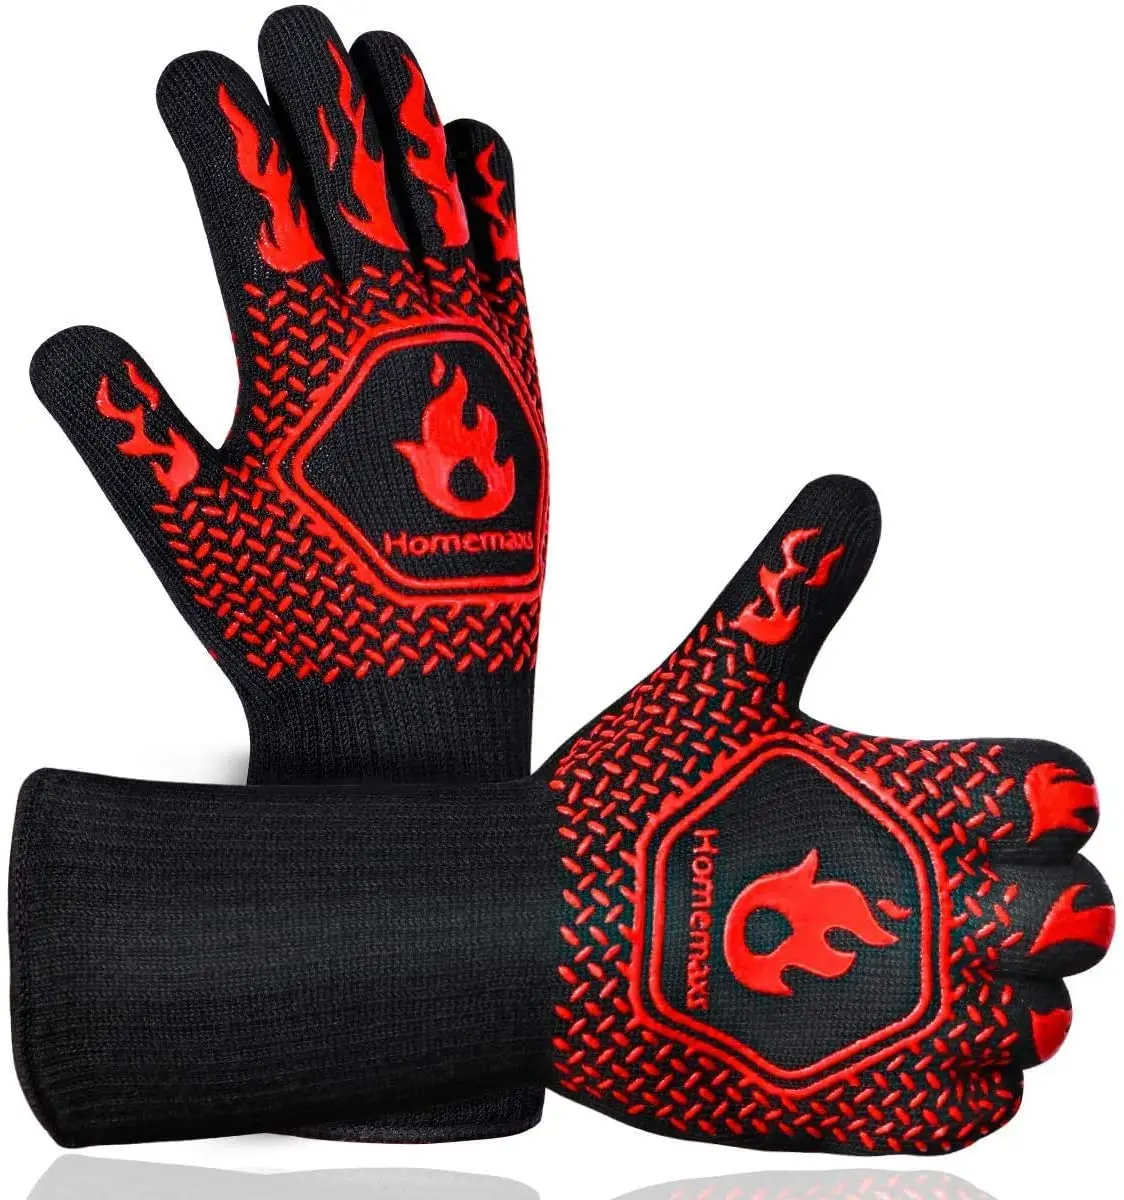 

Custom 1472 F Silicone Glove Heat Resistant BBQ Barbecue High Quality Leather Grill Gloves, Black/red